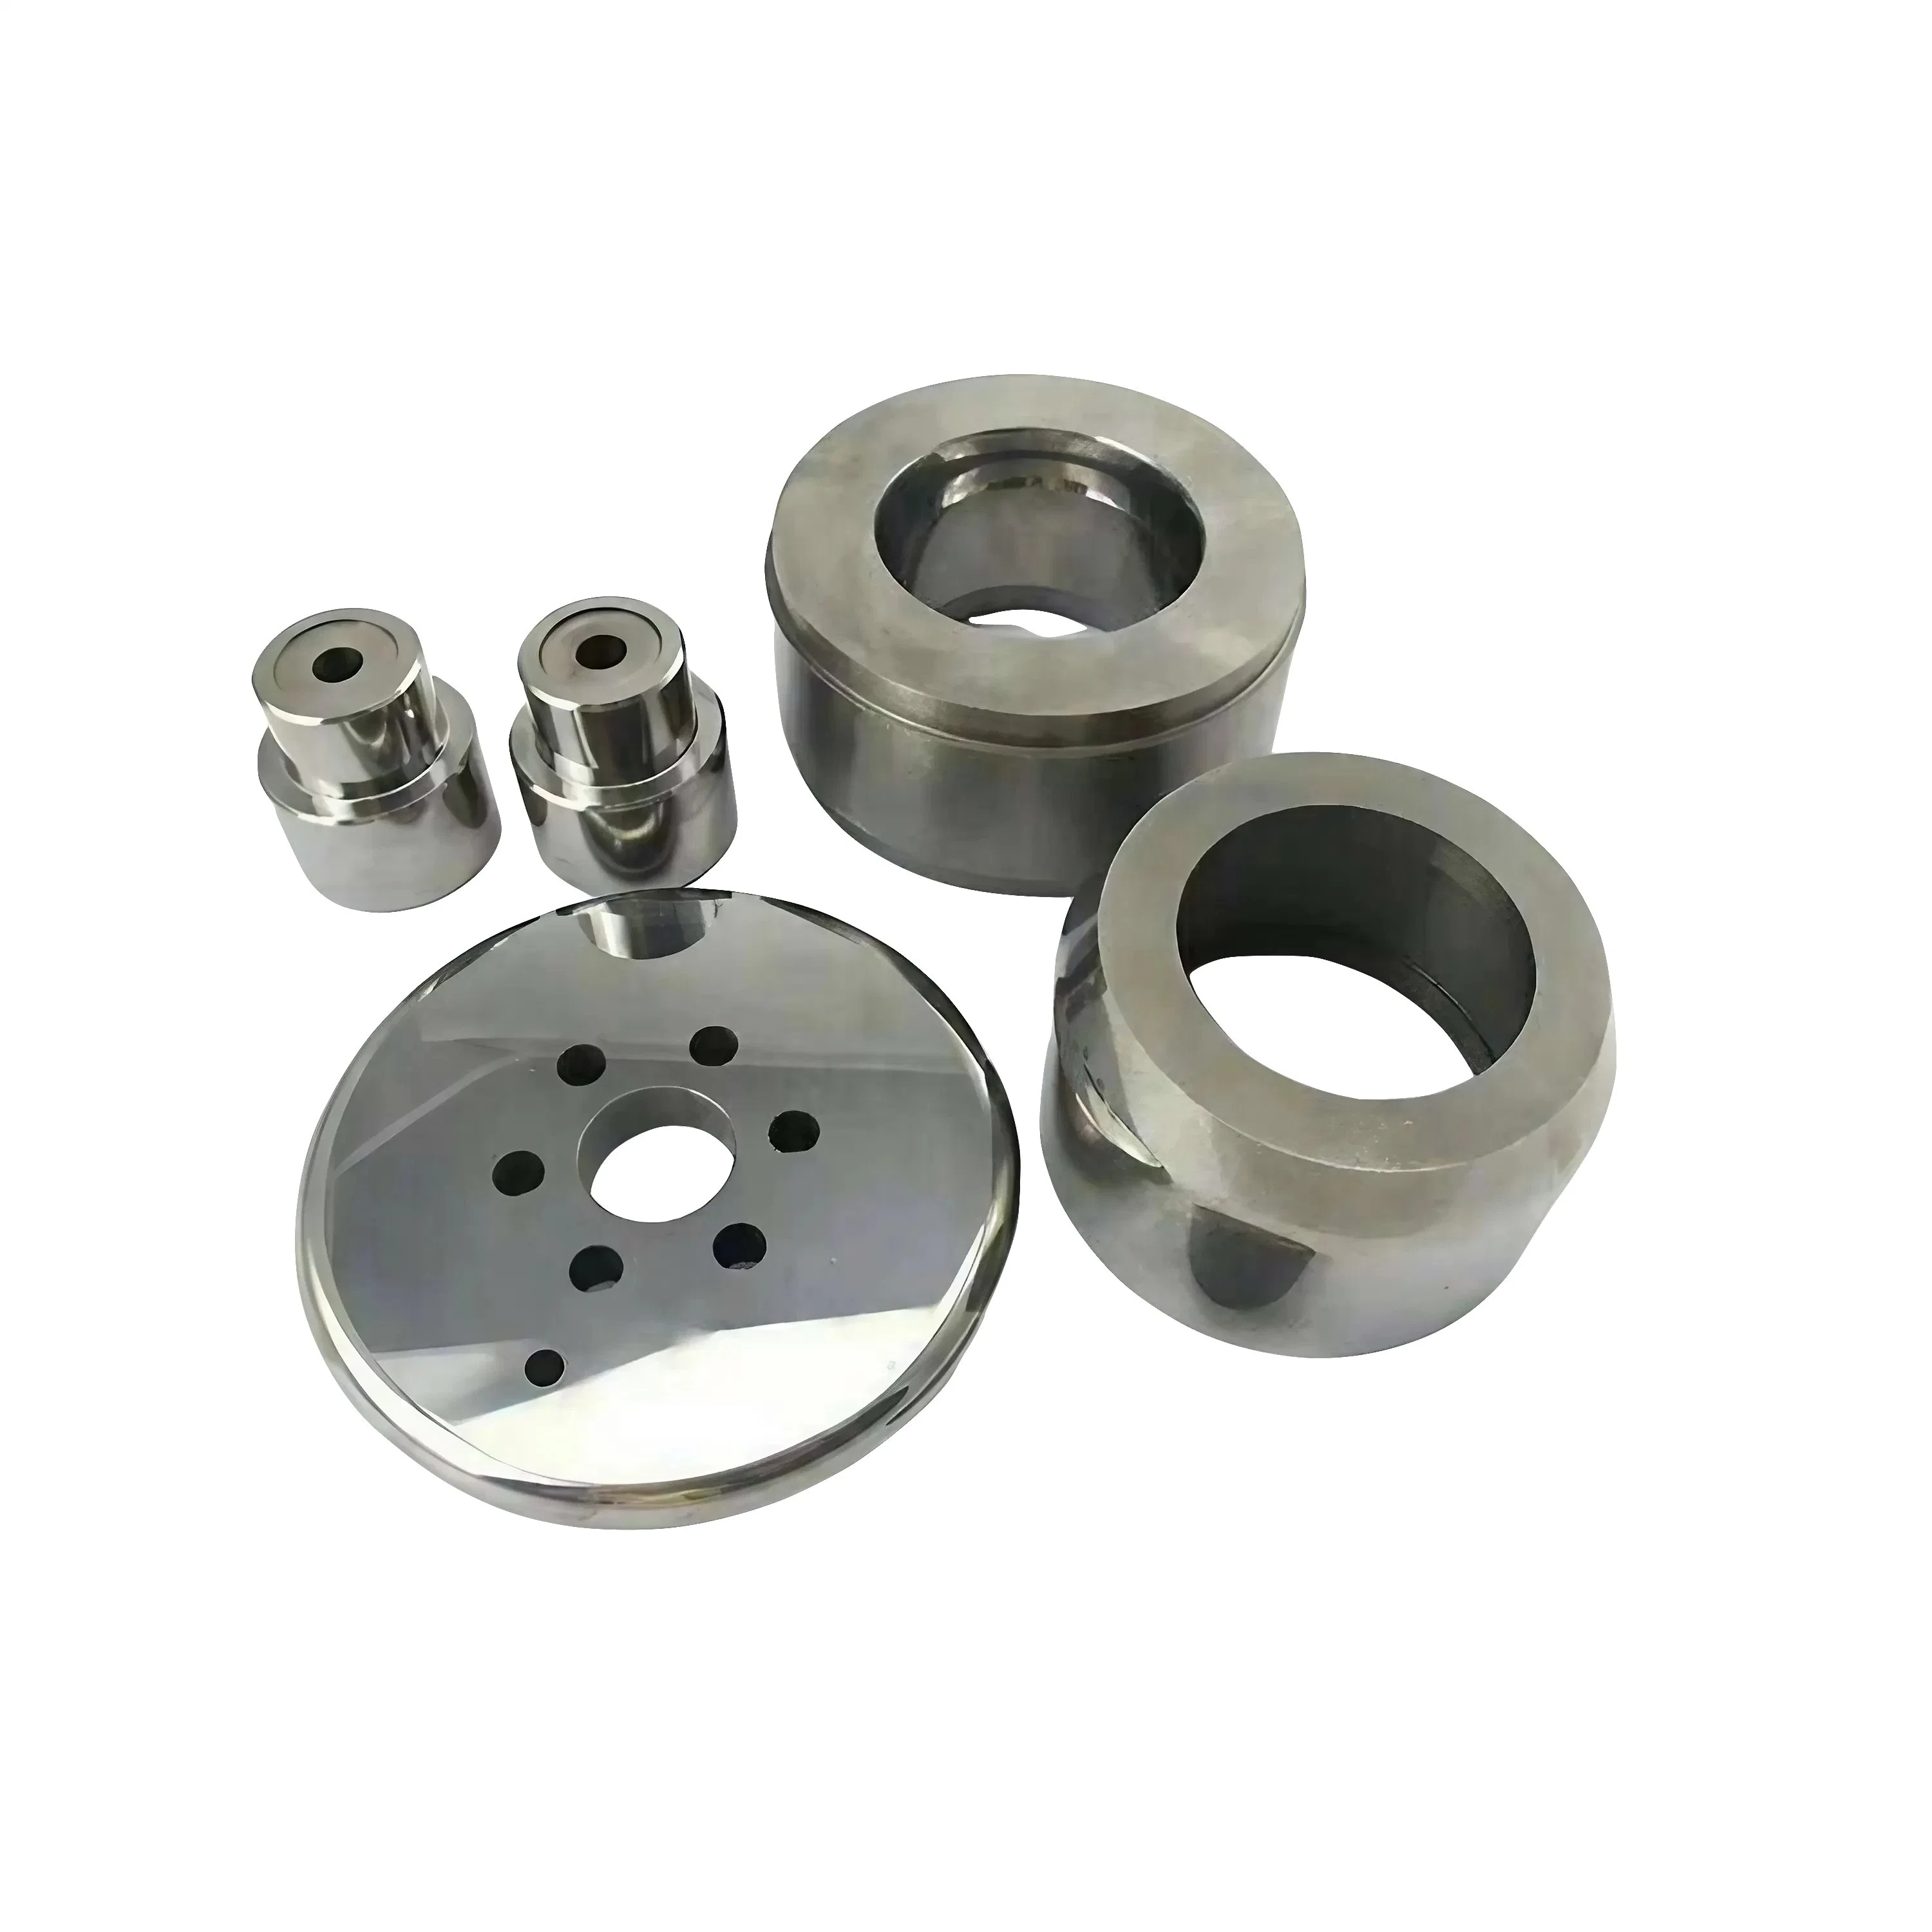 CNC Turning CNC Milling Customized Machining Parts Aluminium Stainless Steel Alloy Cooper